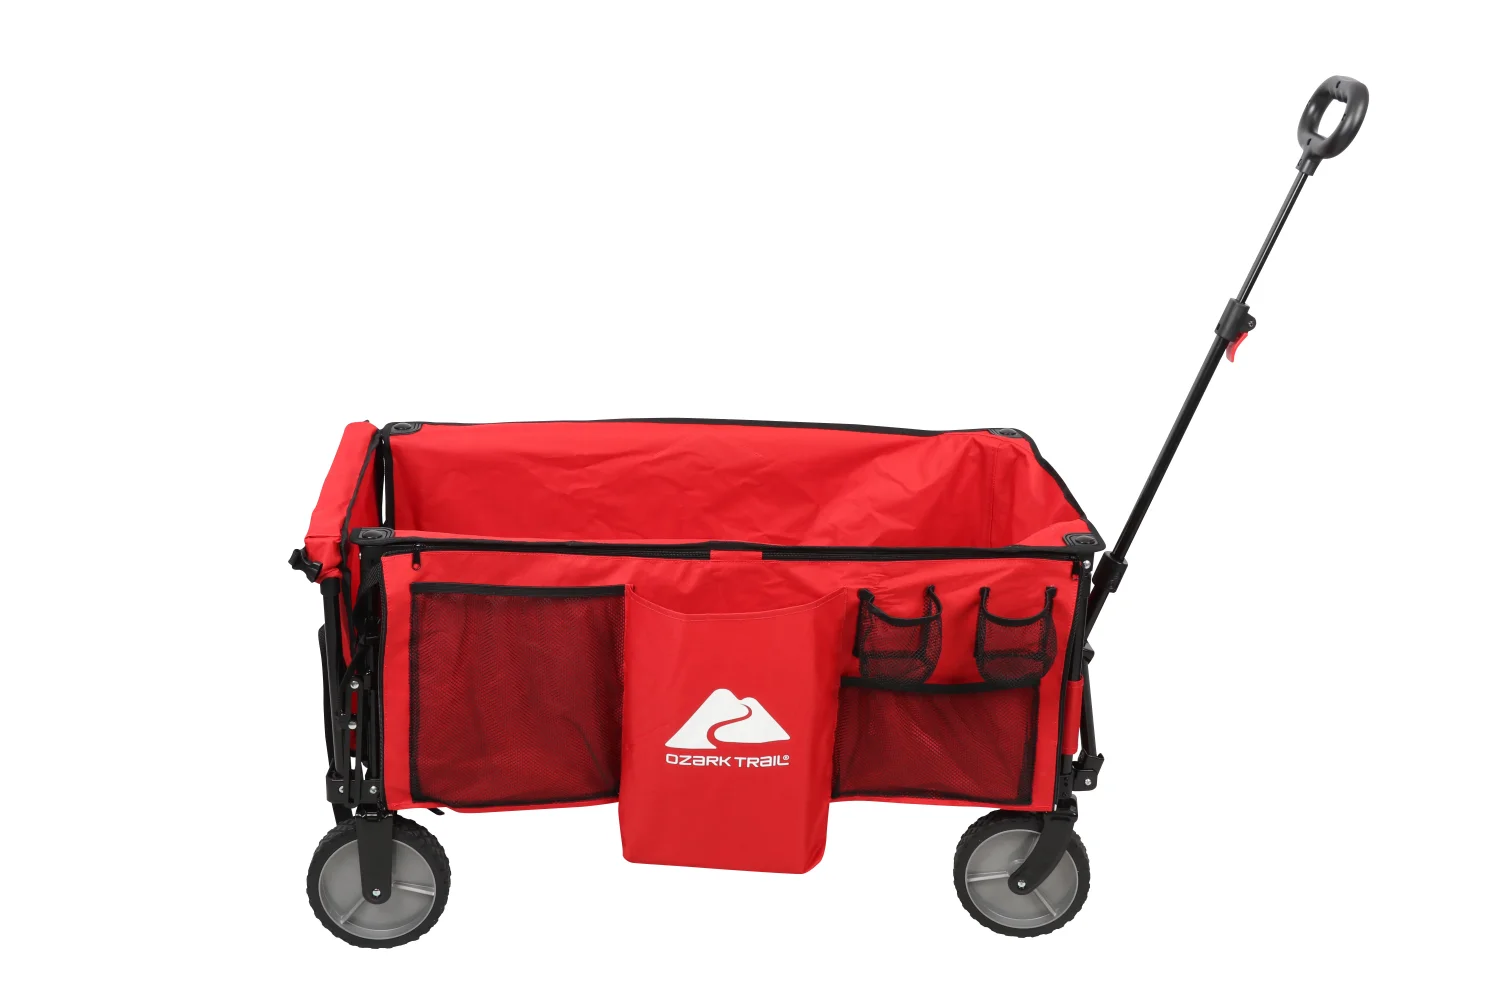 Camping Utility Wagon with Tailgate & Extension Handle, Red  Camping Gear  Camping Tools  Multi Tool  Outdoor Camping